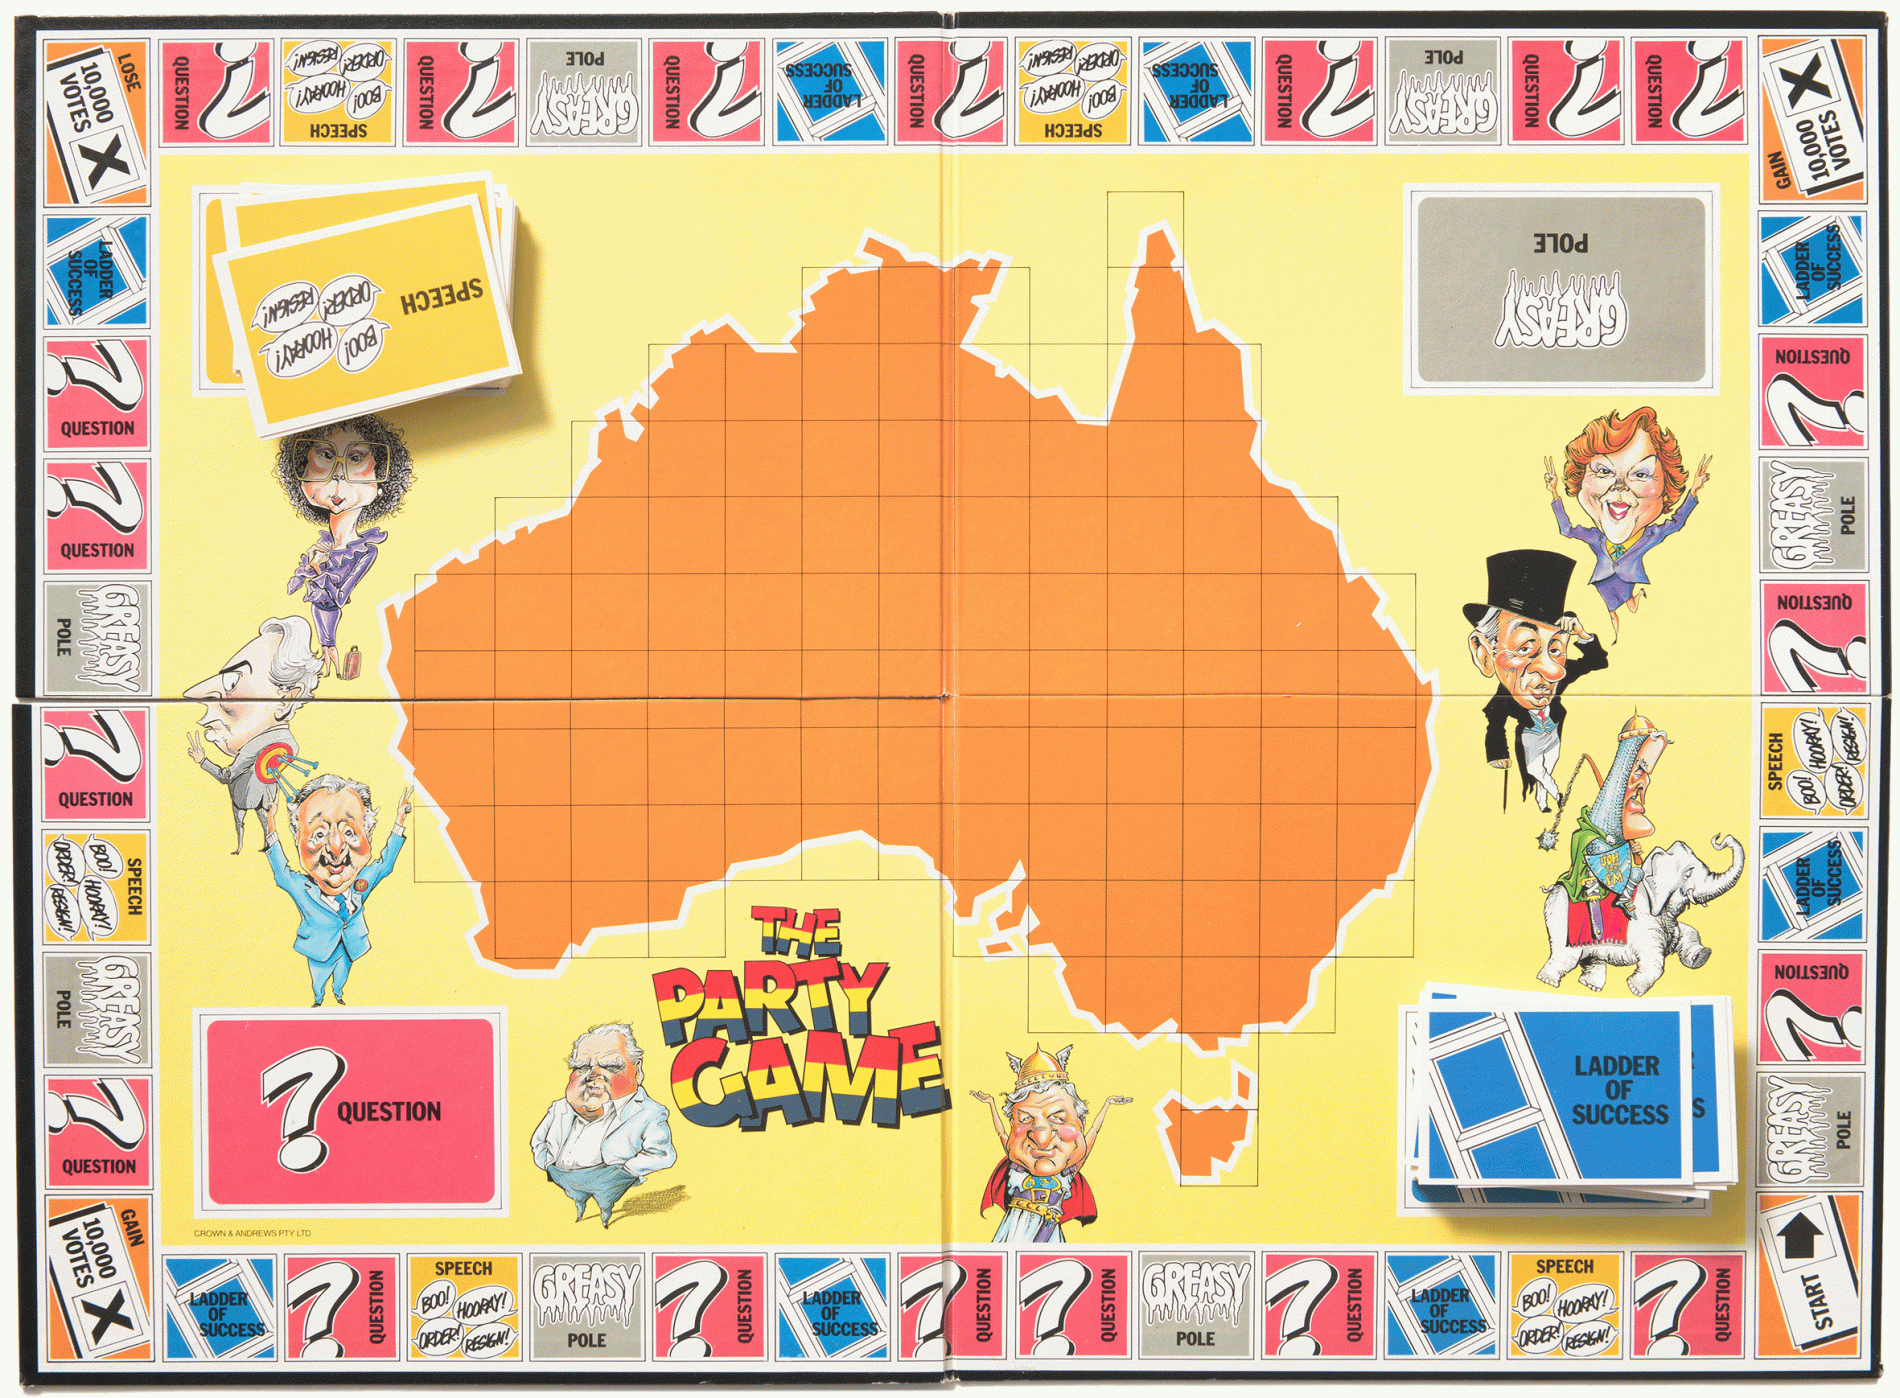 A yellow board game board is open with a map of Australia in the middle and the words The Party Games with red, yellow and blue lettering. Caricatures of politicians feature n the board. Squares along the border have words like Question, Ladder of success, Greasy pole and speech on them. 